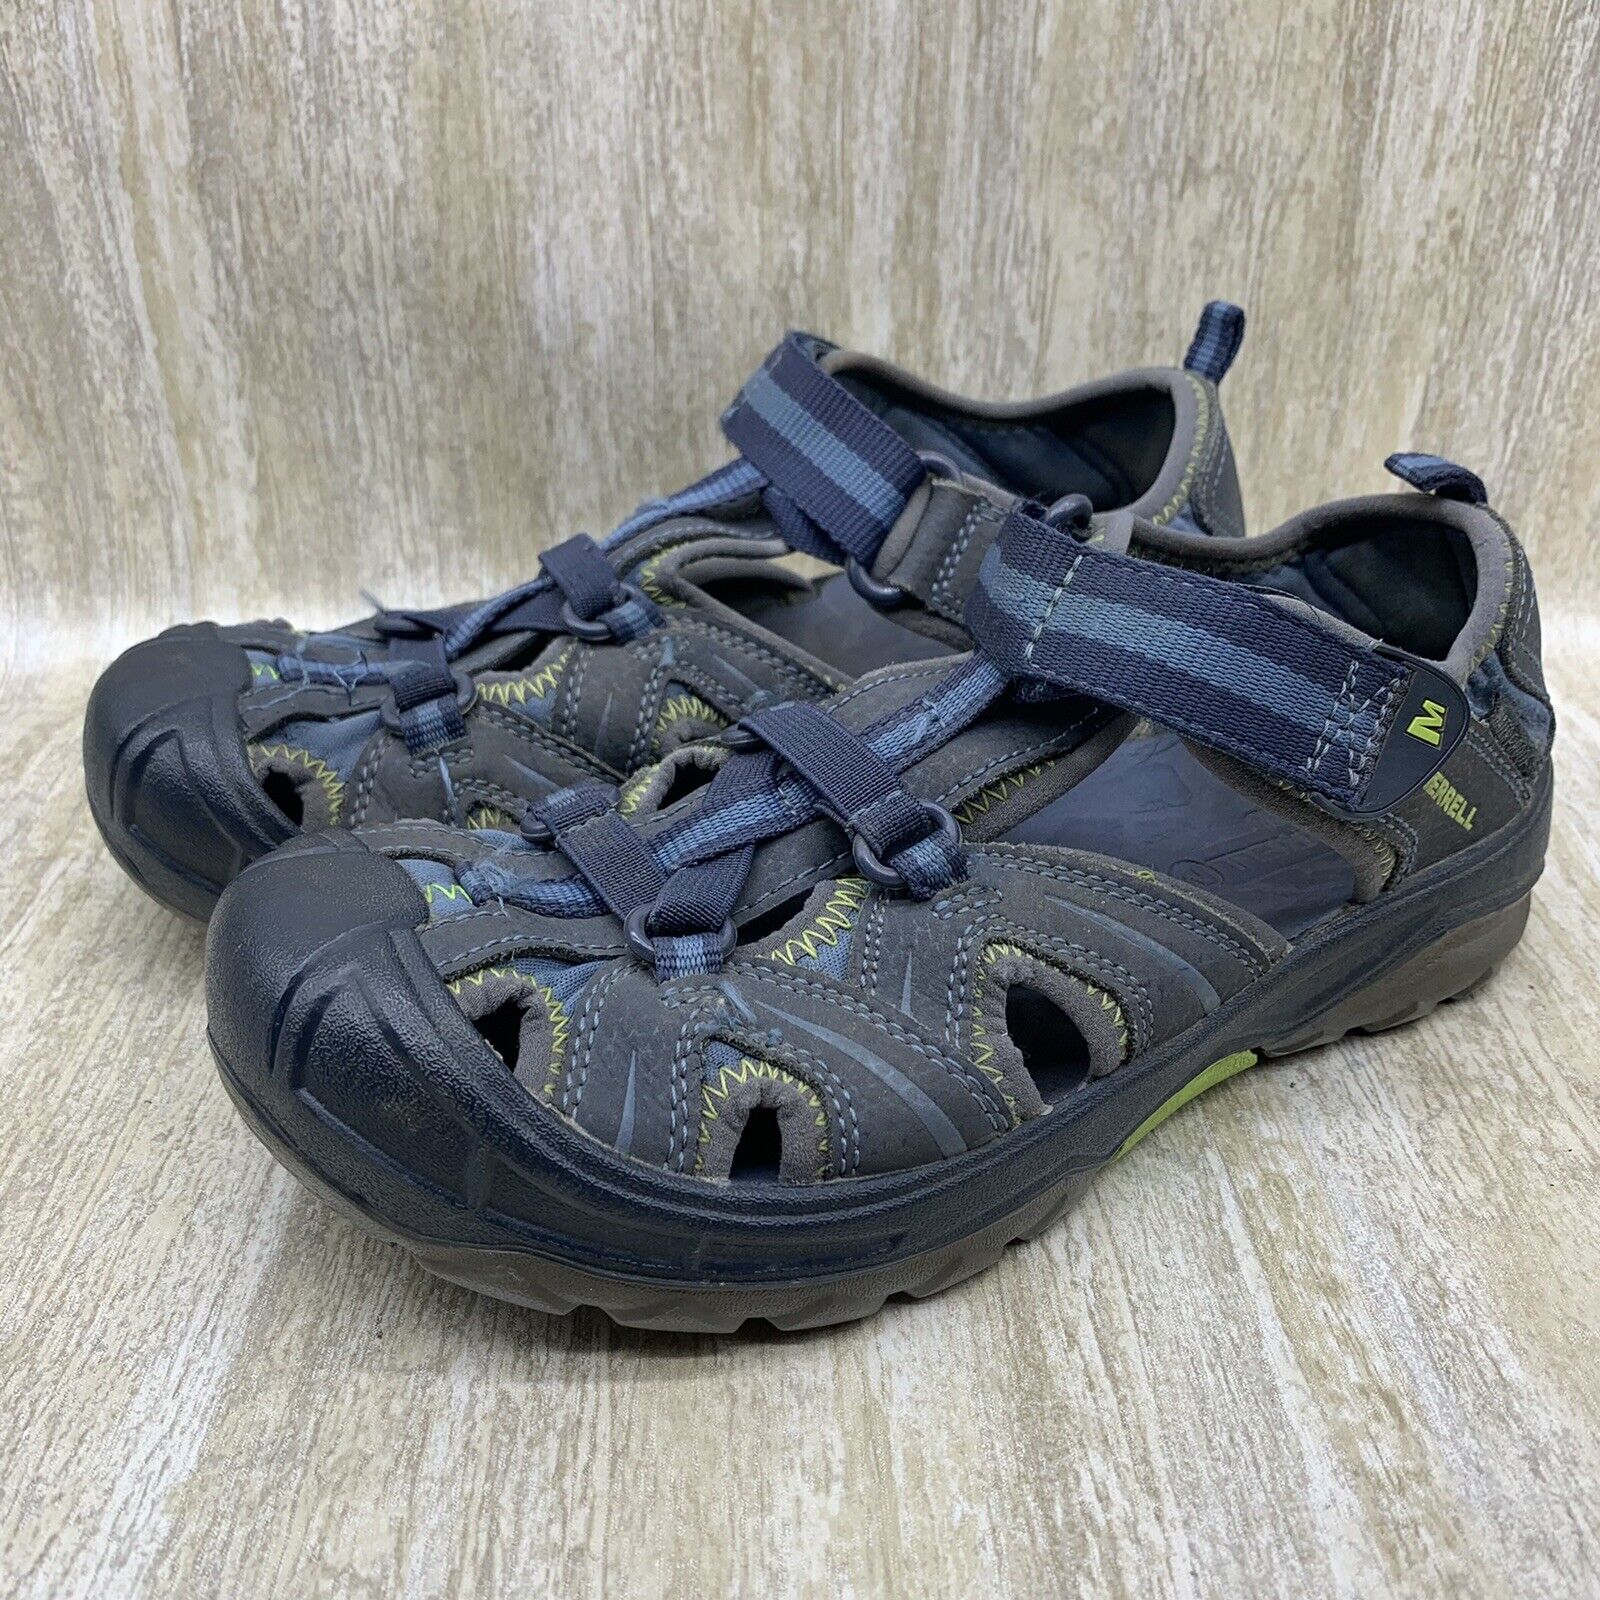 Merrell OFFicial shop Cheap sale Sandals Size 6W 6 Wide Gray Hydro Youth Hiker Water Blue